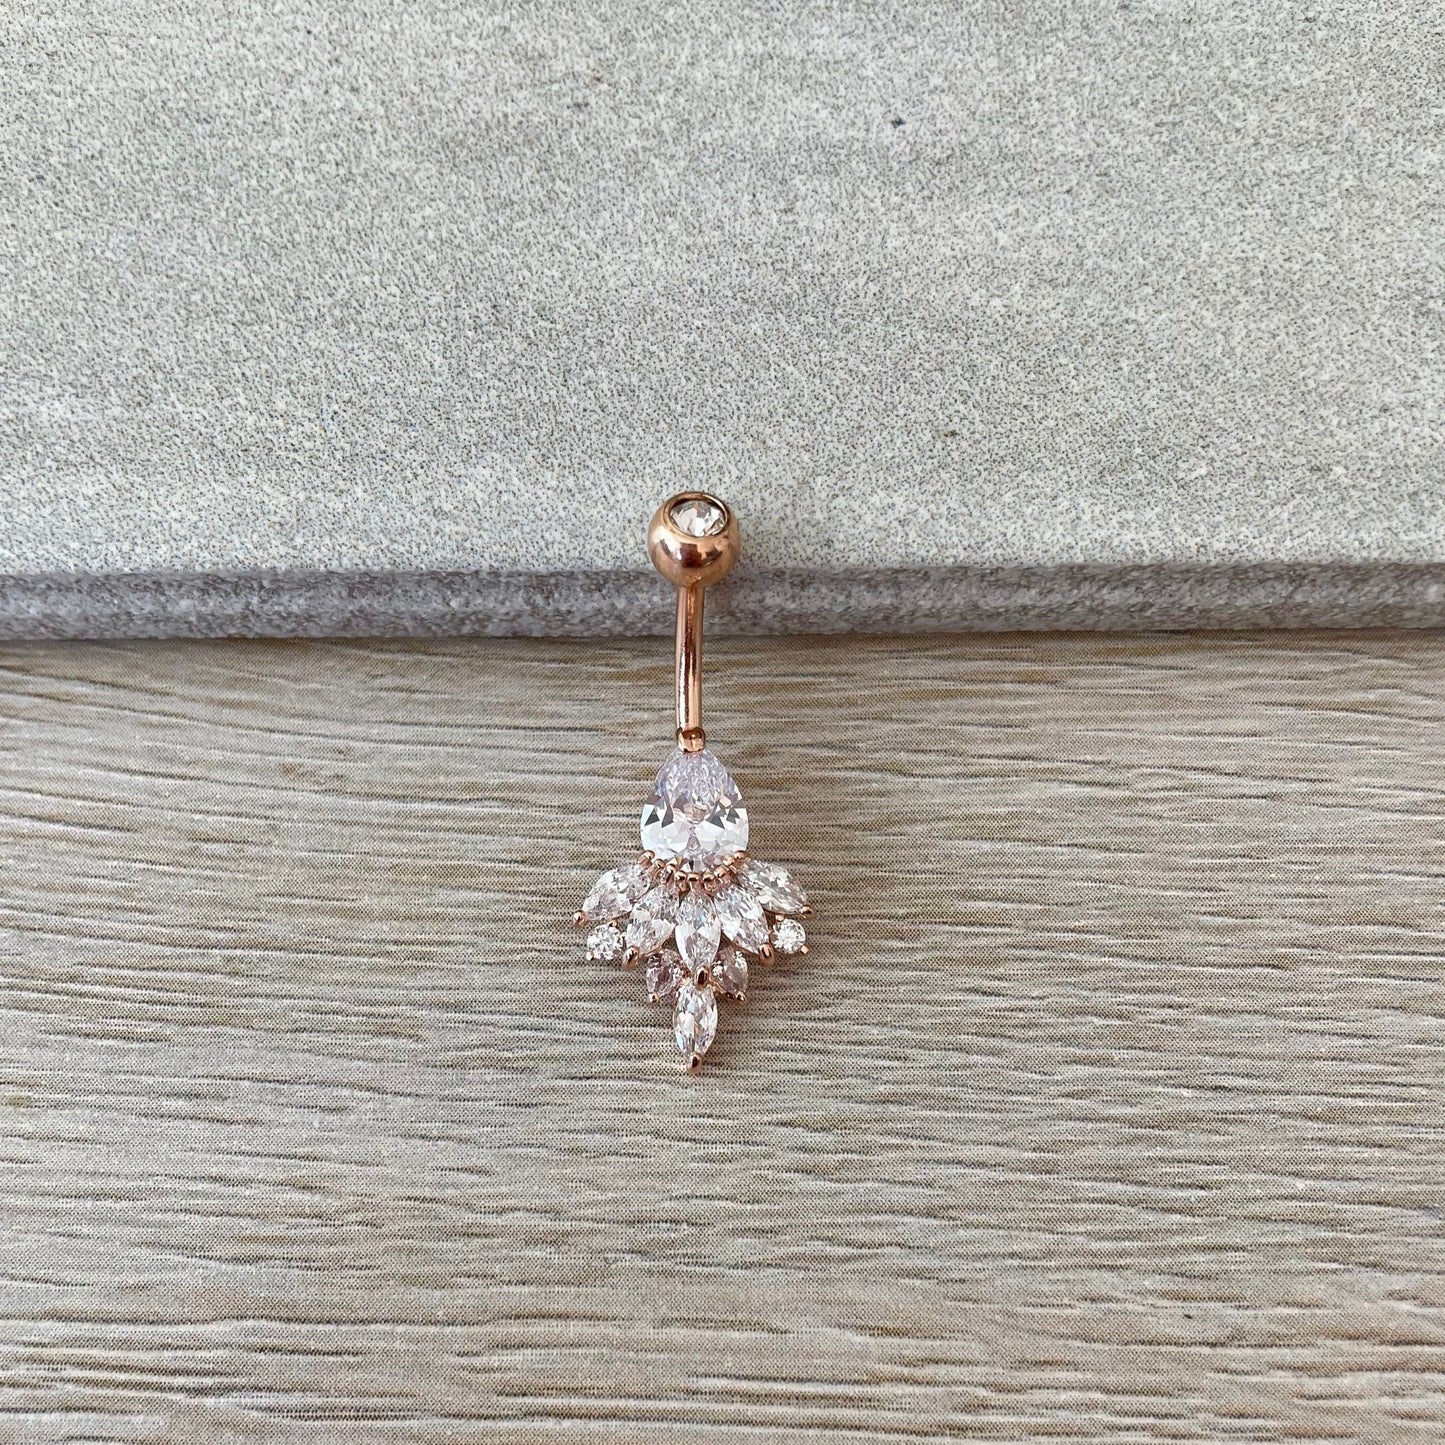 Rose Gold Belly Button Piercing (14G | 10mm | Surgical Steel | Rose Gold, Gold or Silver)Rose Gold Belly Button Piercing (14G | 10mm | Surgical Steel | Rose Gold, Gold or Silver)